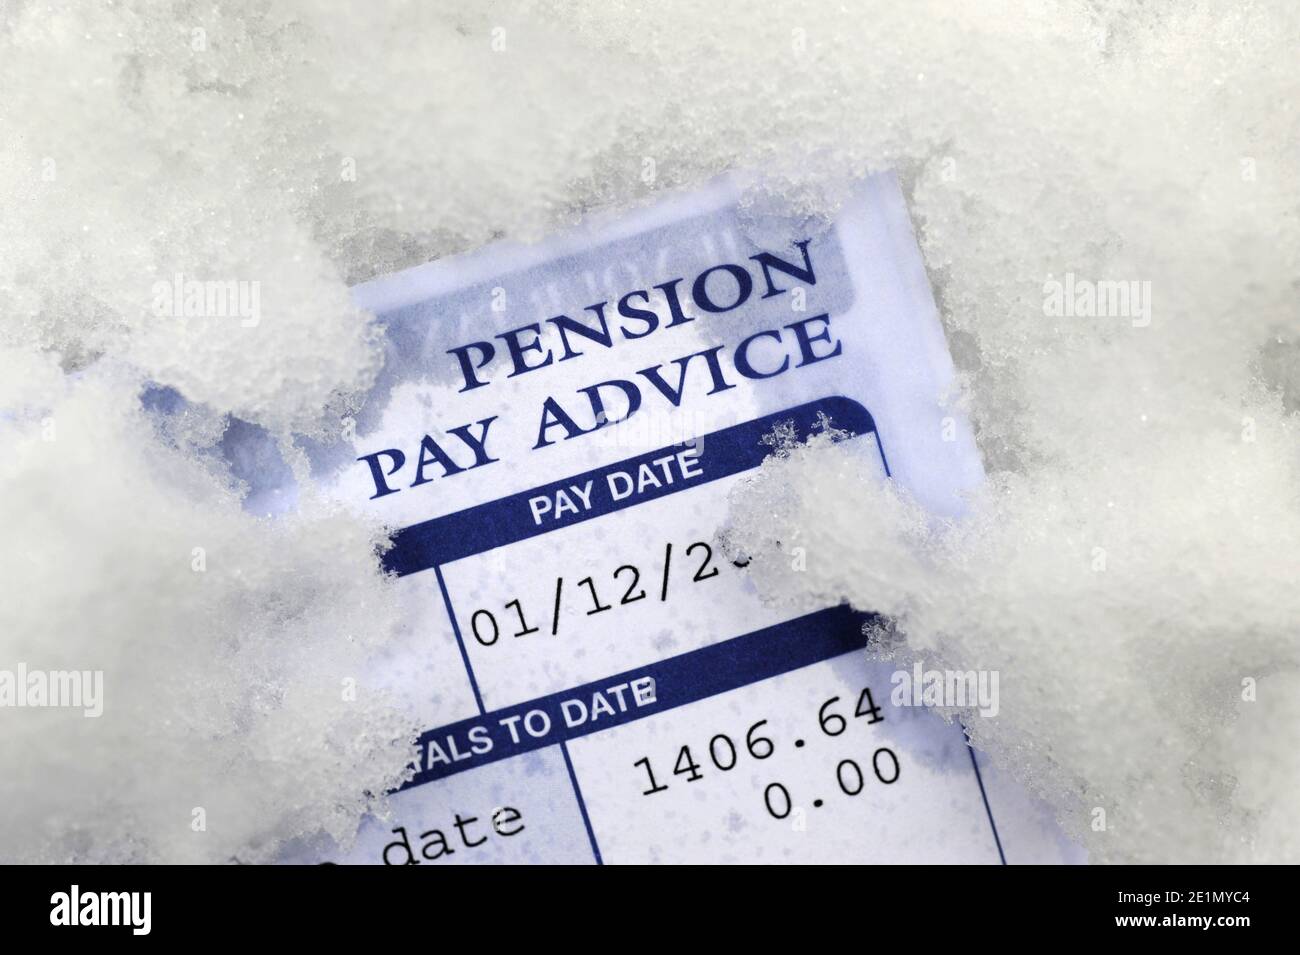 PENSION PAY ADVICE IN SNOW AND ICE RE PENSIONS INCOMES PENSIONERS RECESSION RETIREMENT THE ECONOMY ICE FROZEN PAY FREEZE ETC UK Stock Photo